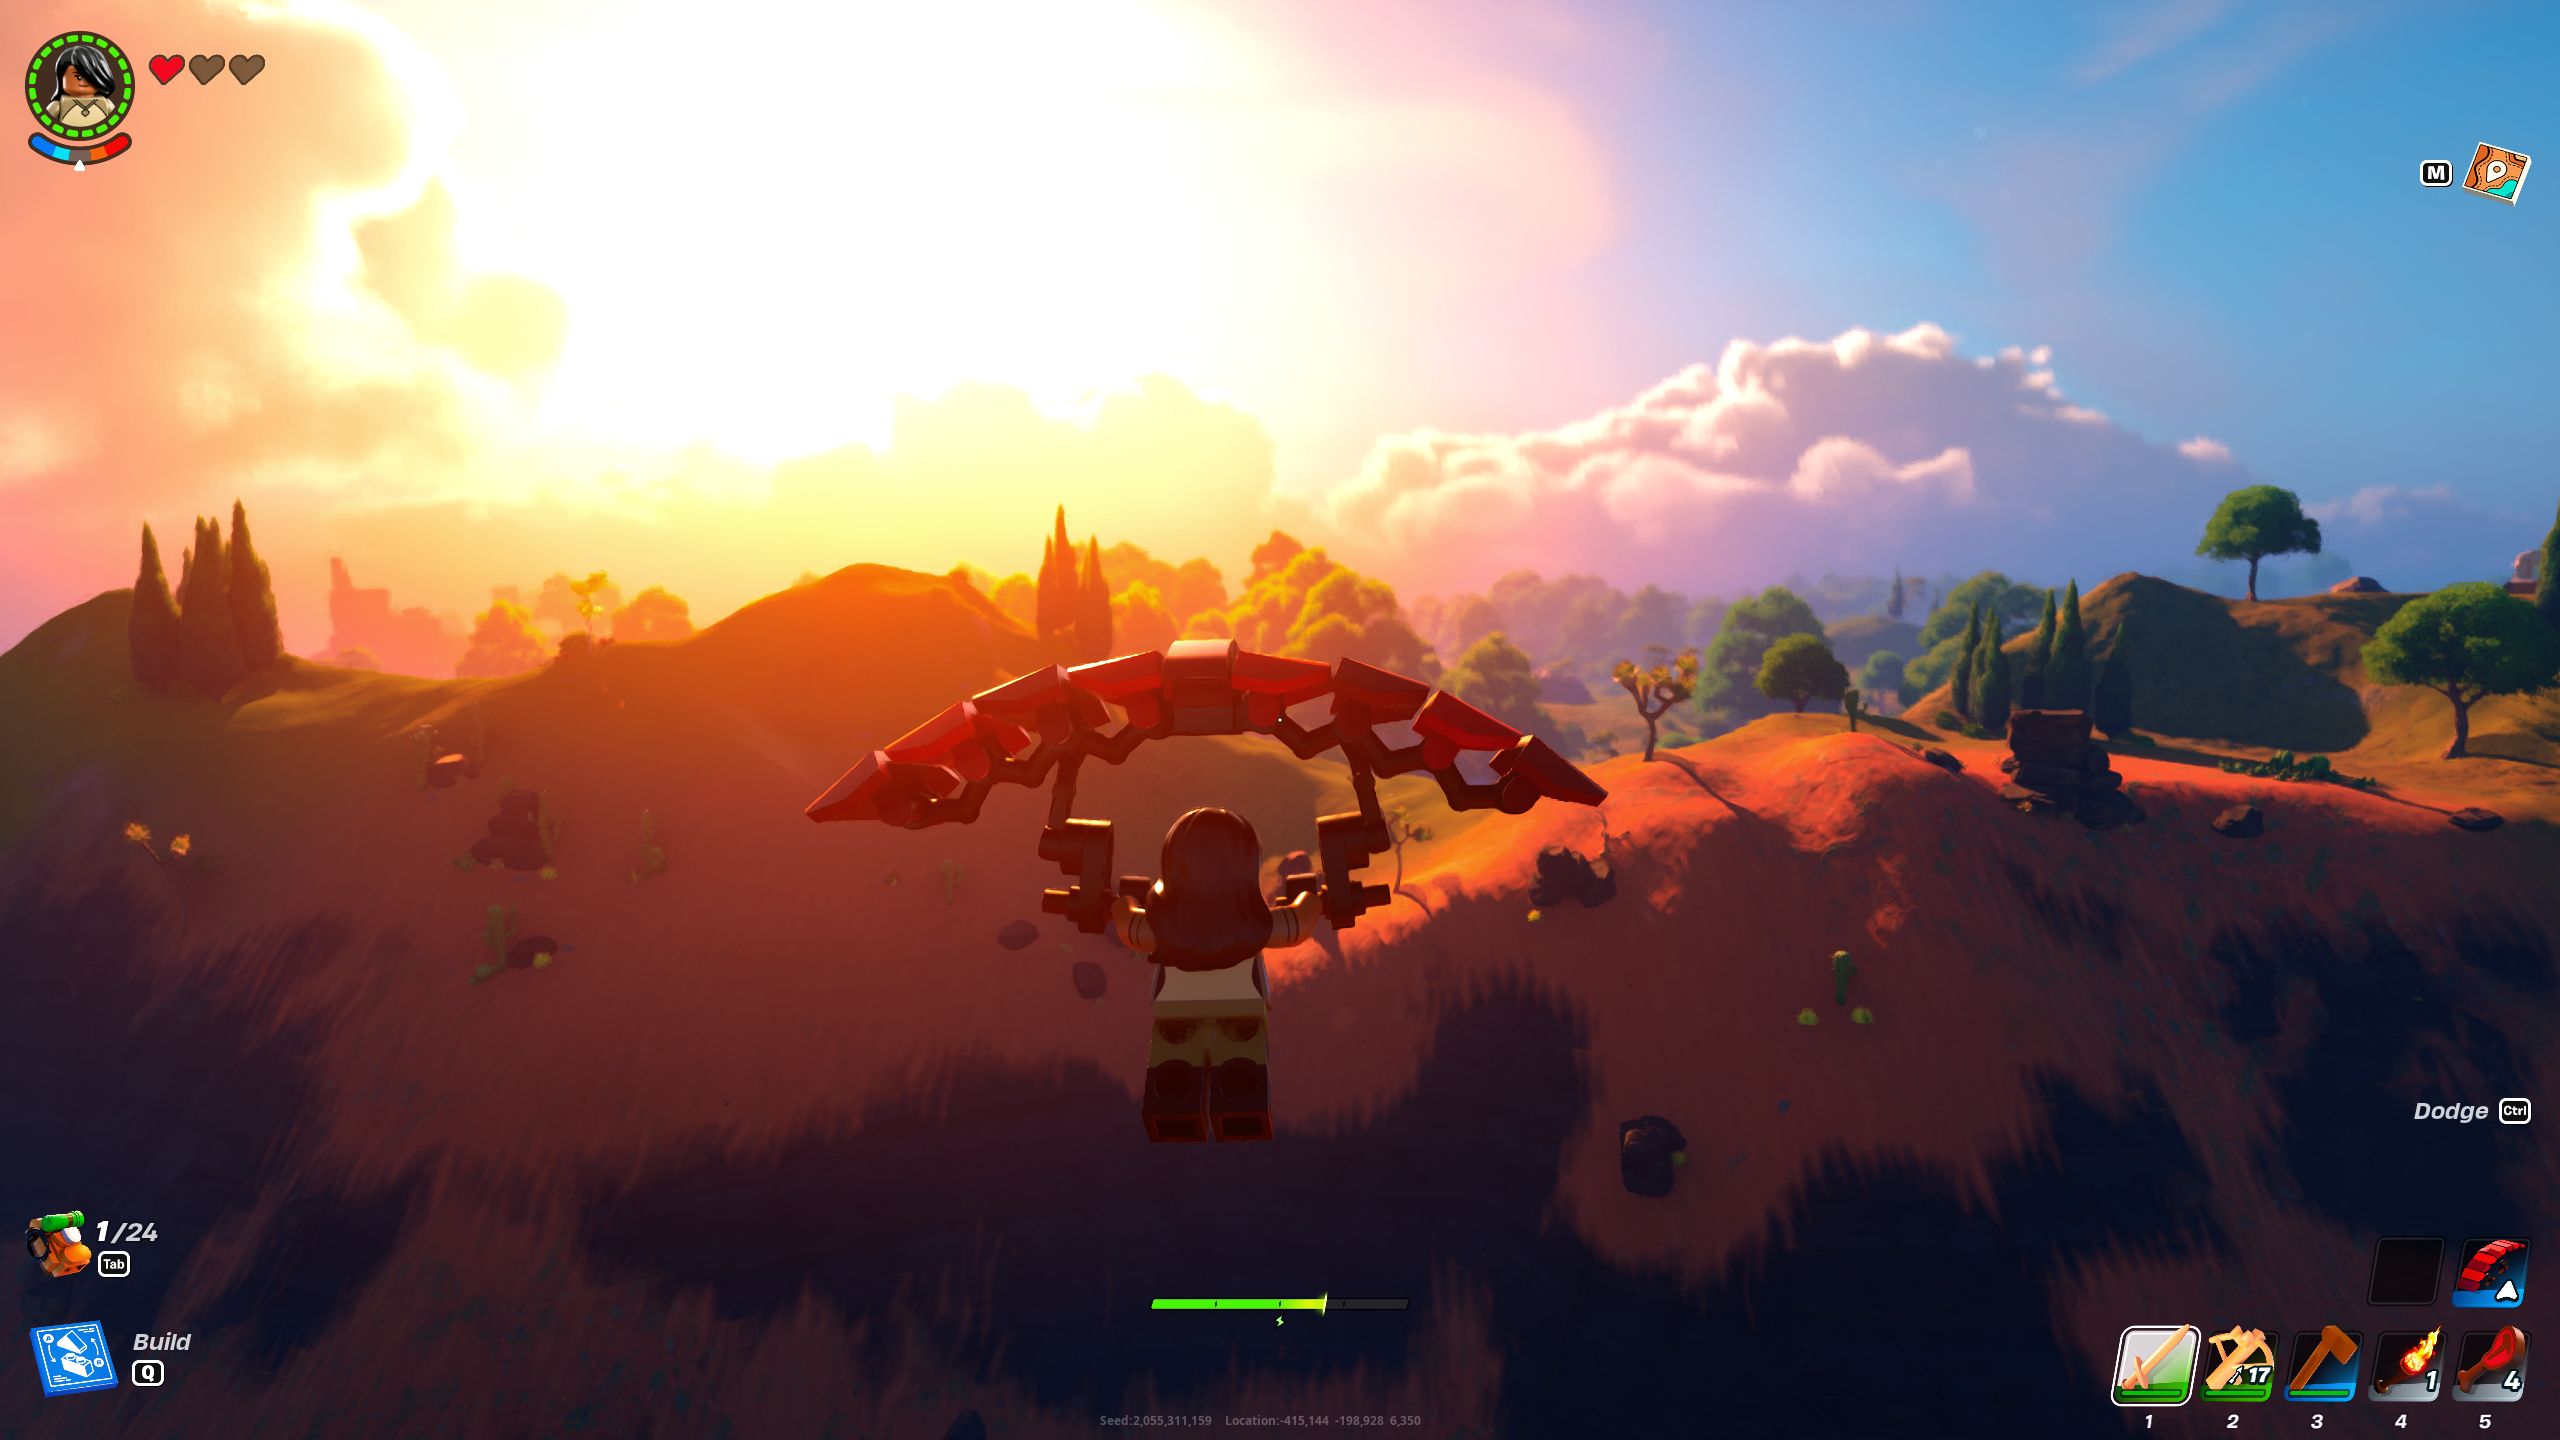 LEGO Fortnite Minifigure Gliding Towards Forested Hillside Using Red Glider At Sunset